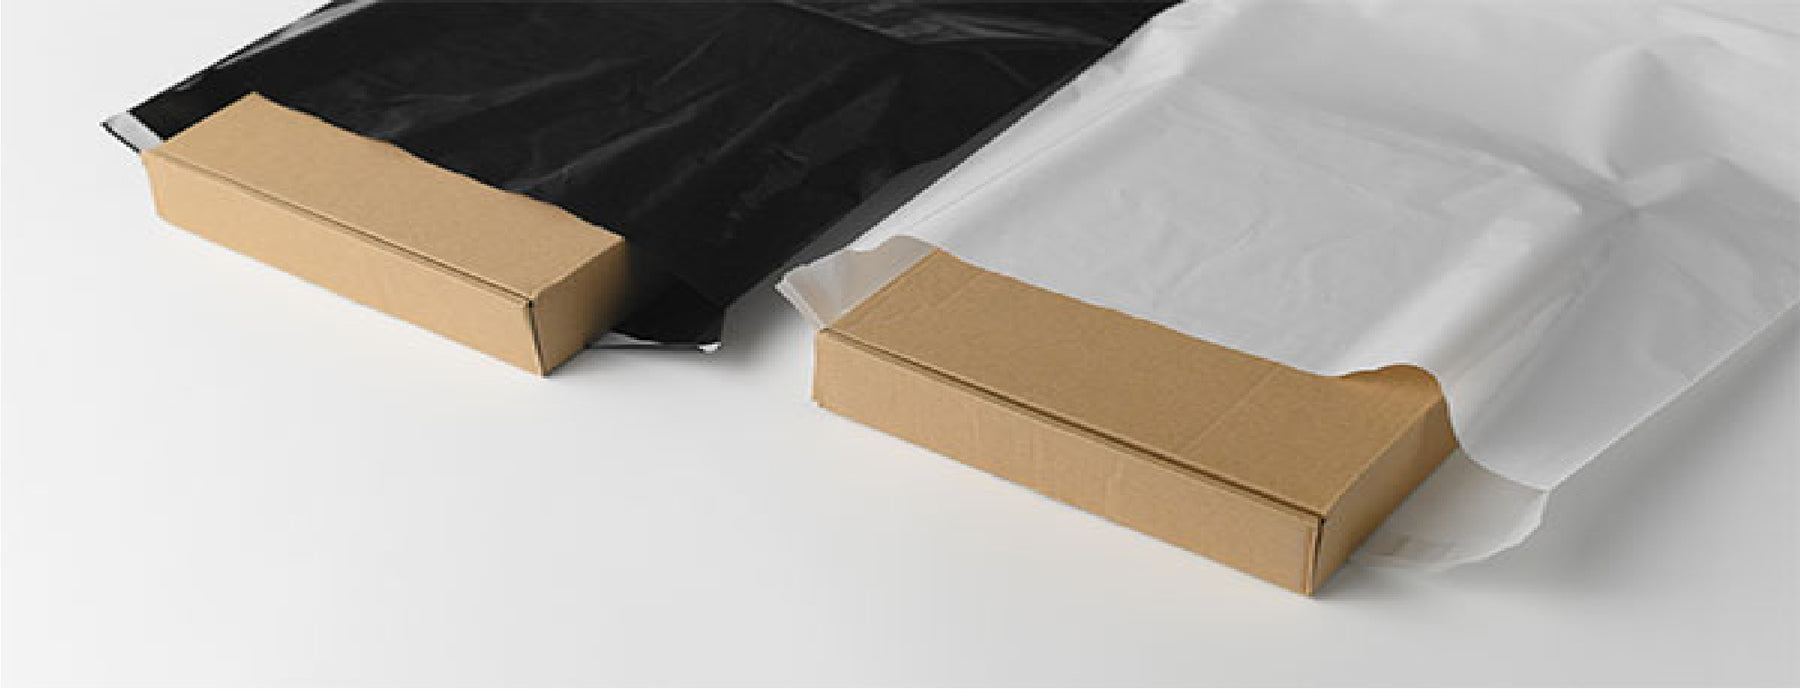 Packman: Logistic Packaging: Where to store poly mailer